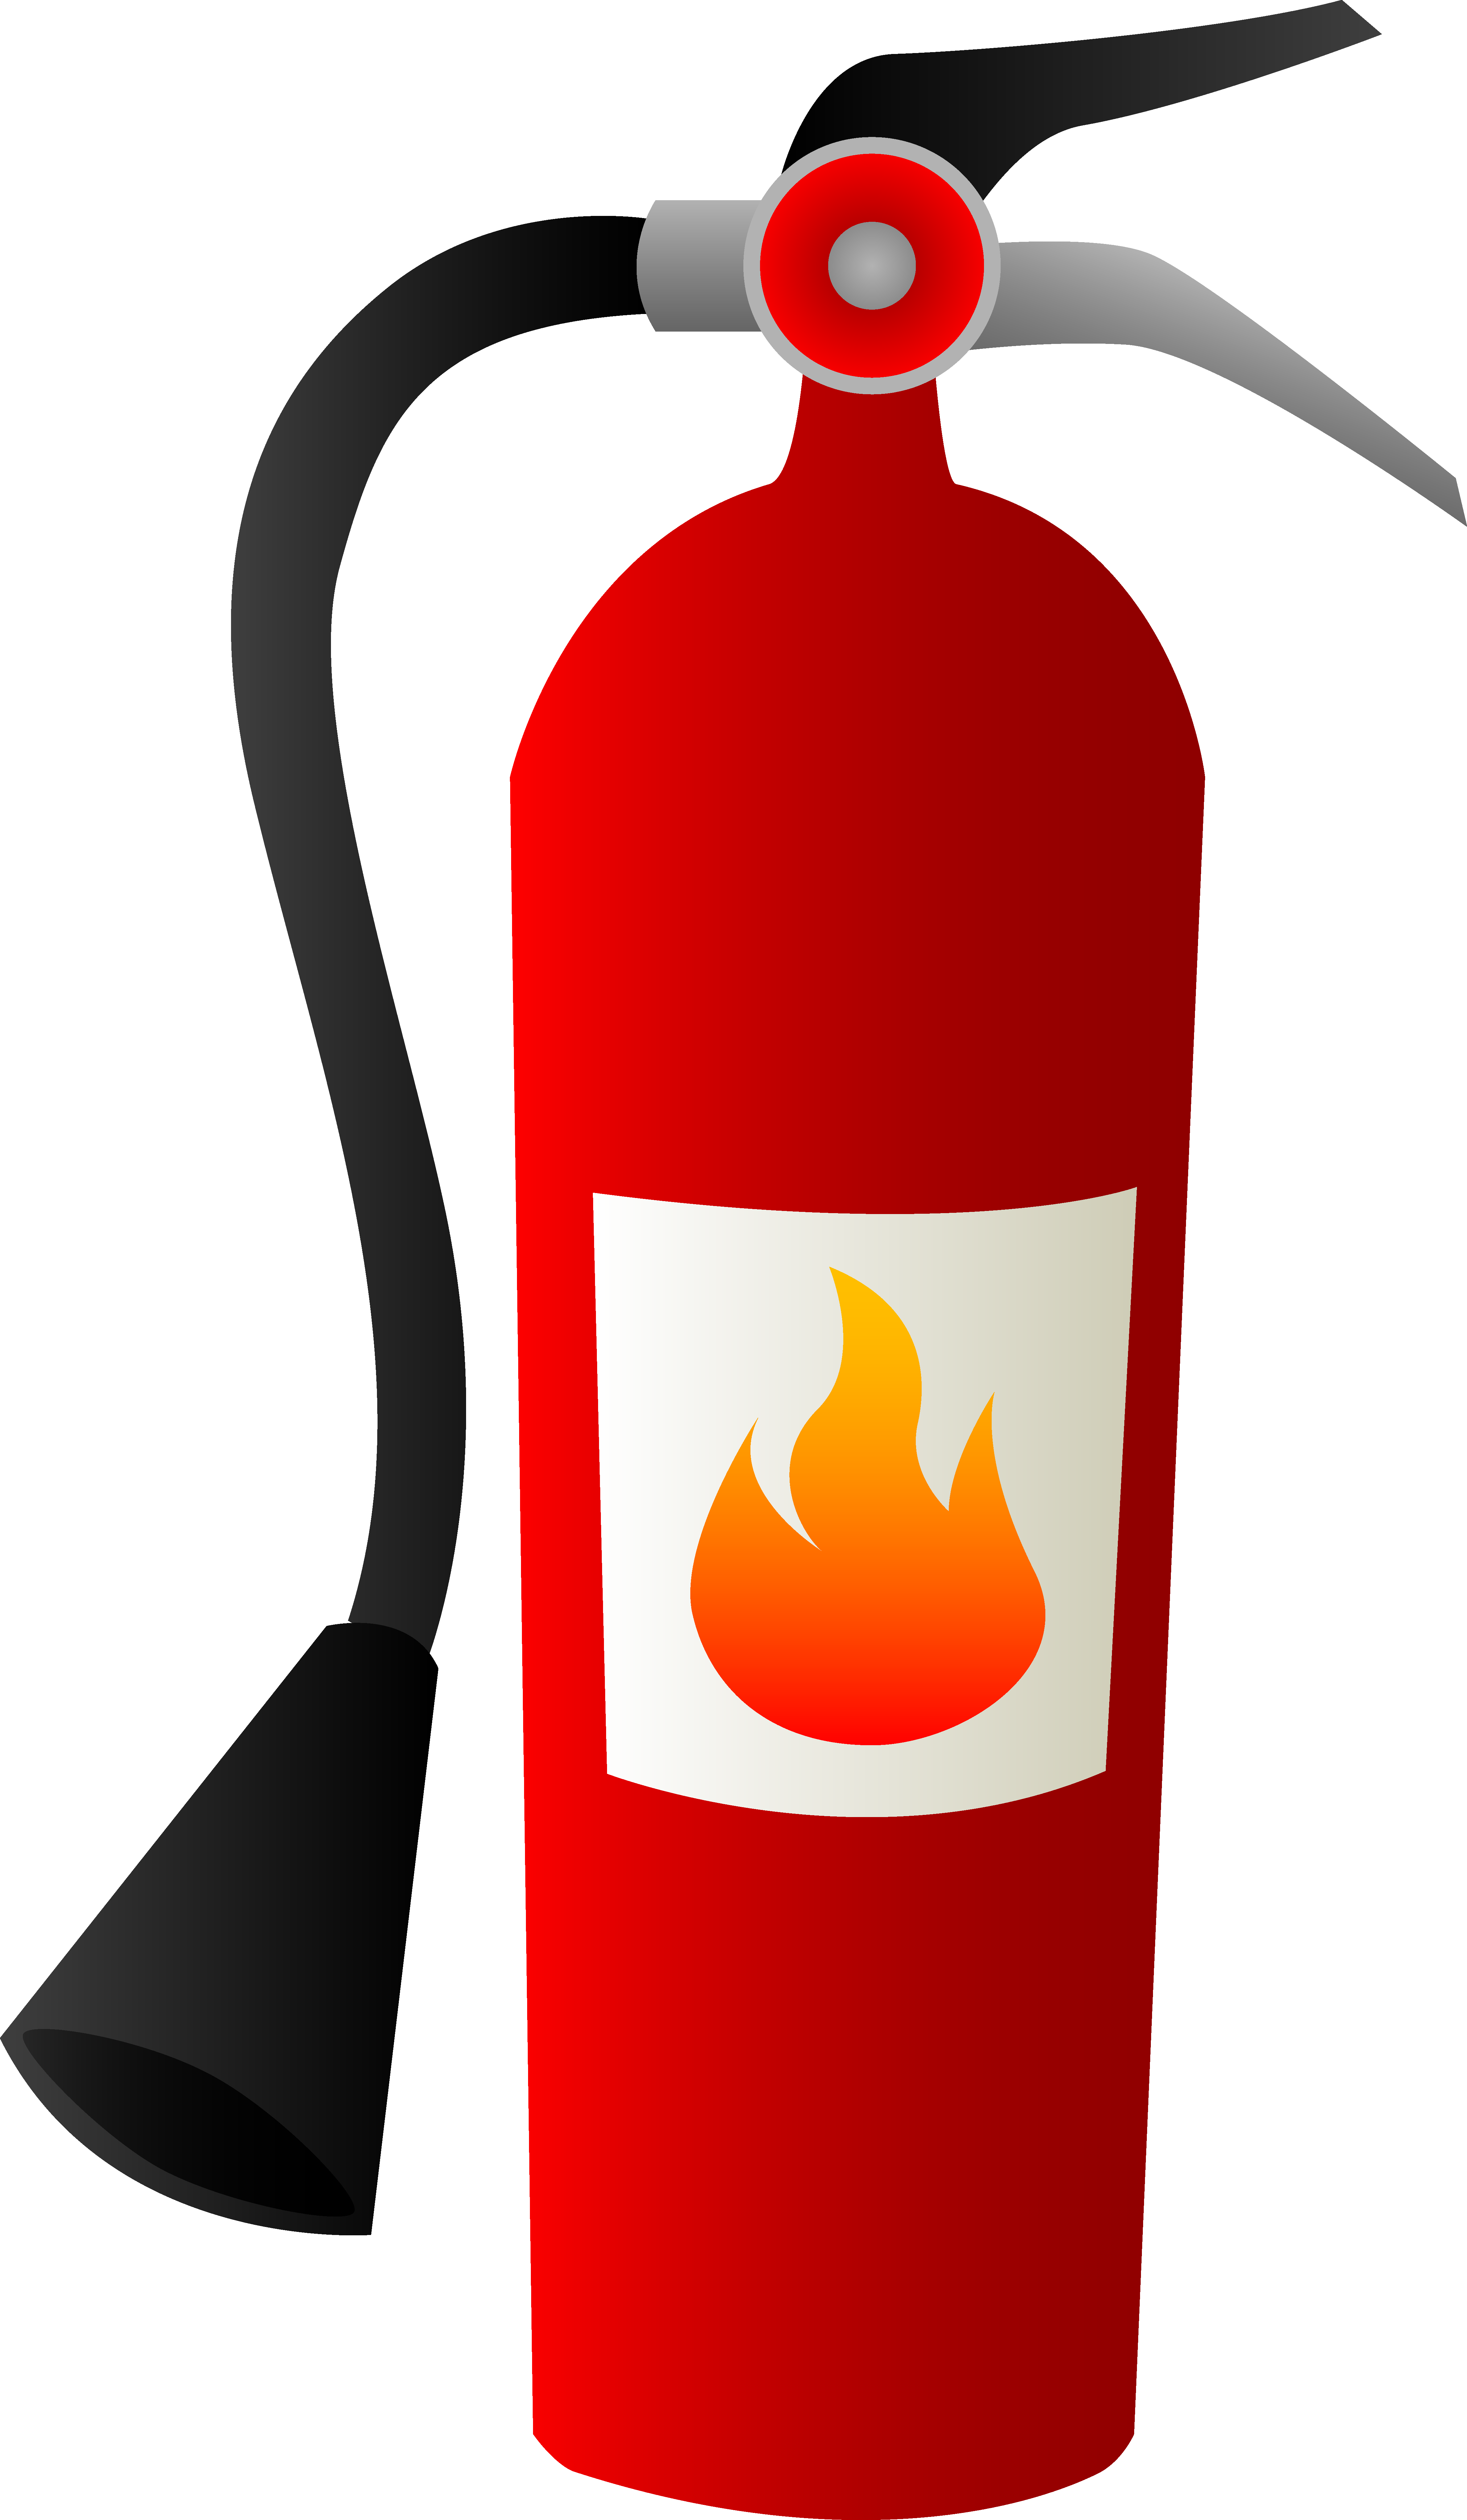 fire safety clipart - Fire Extinguisher Clip Art